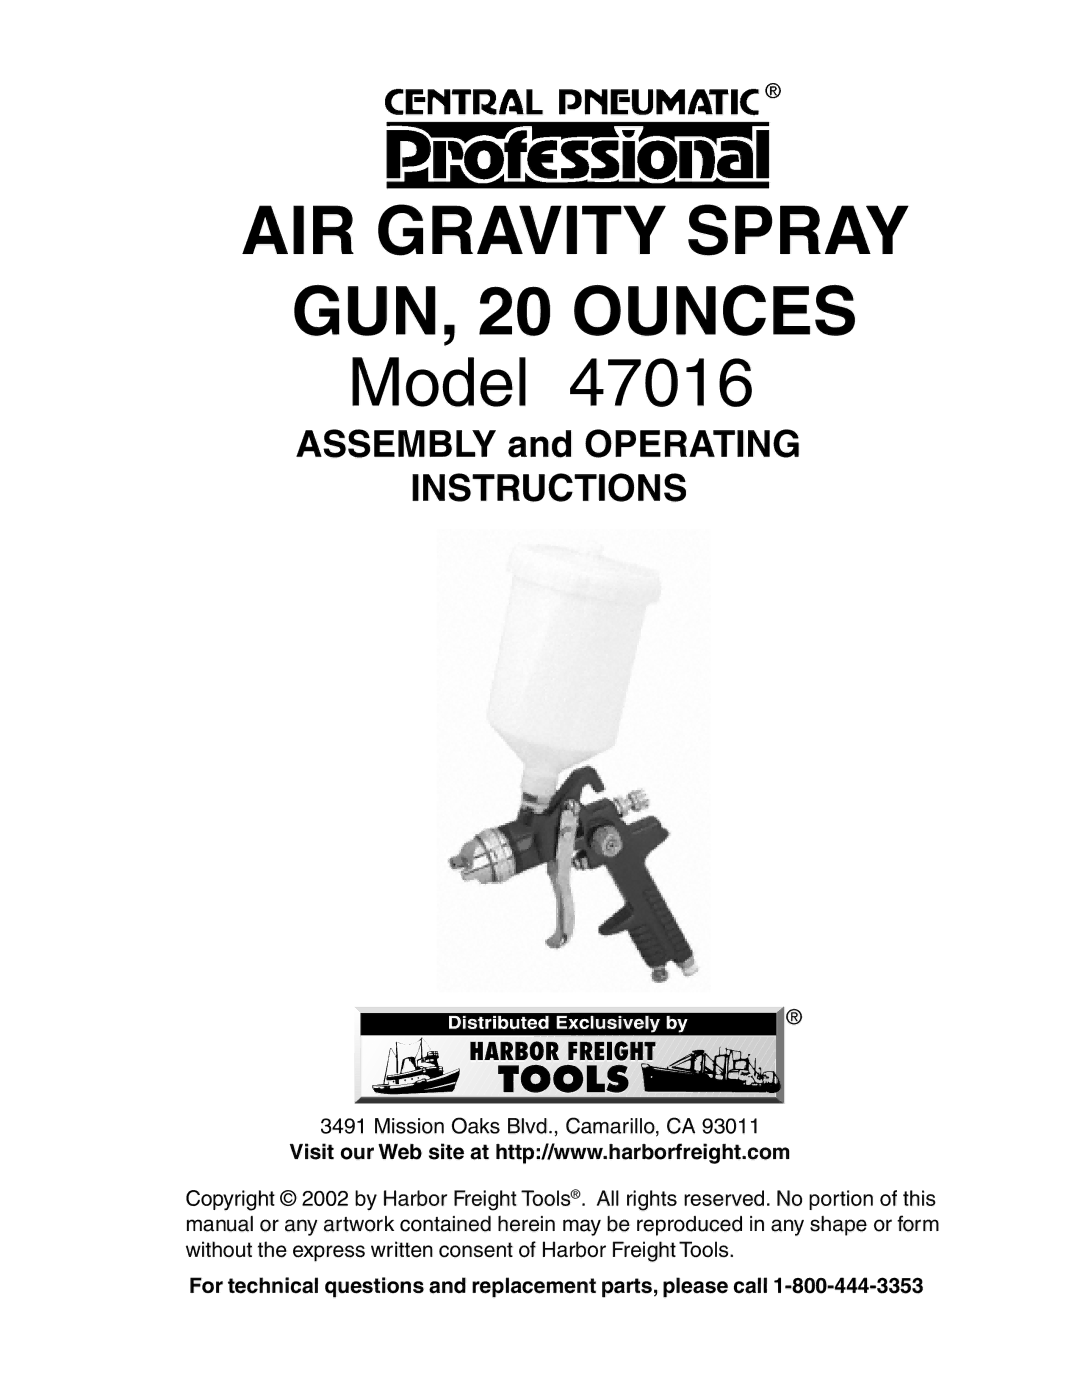 Harbor Freight Tools 47016 operating instructions AIR Gravity Spray GUN, 20 Ounces 